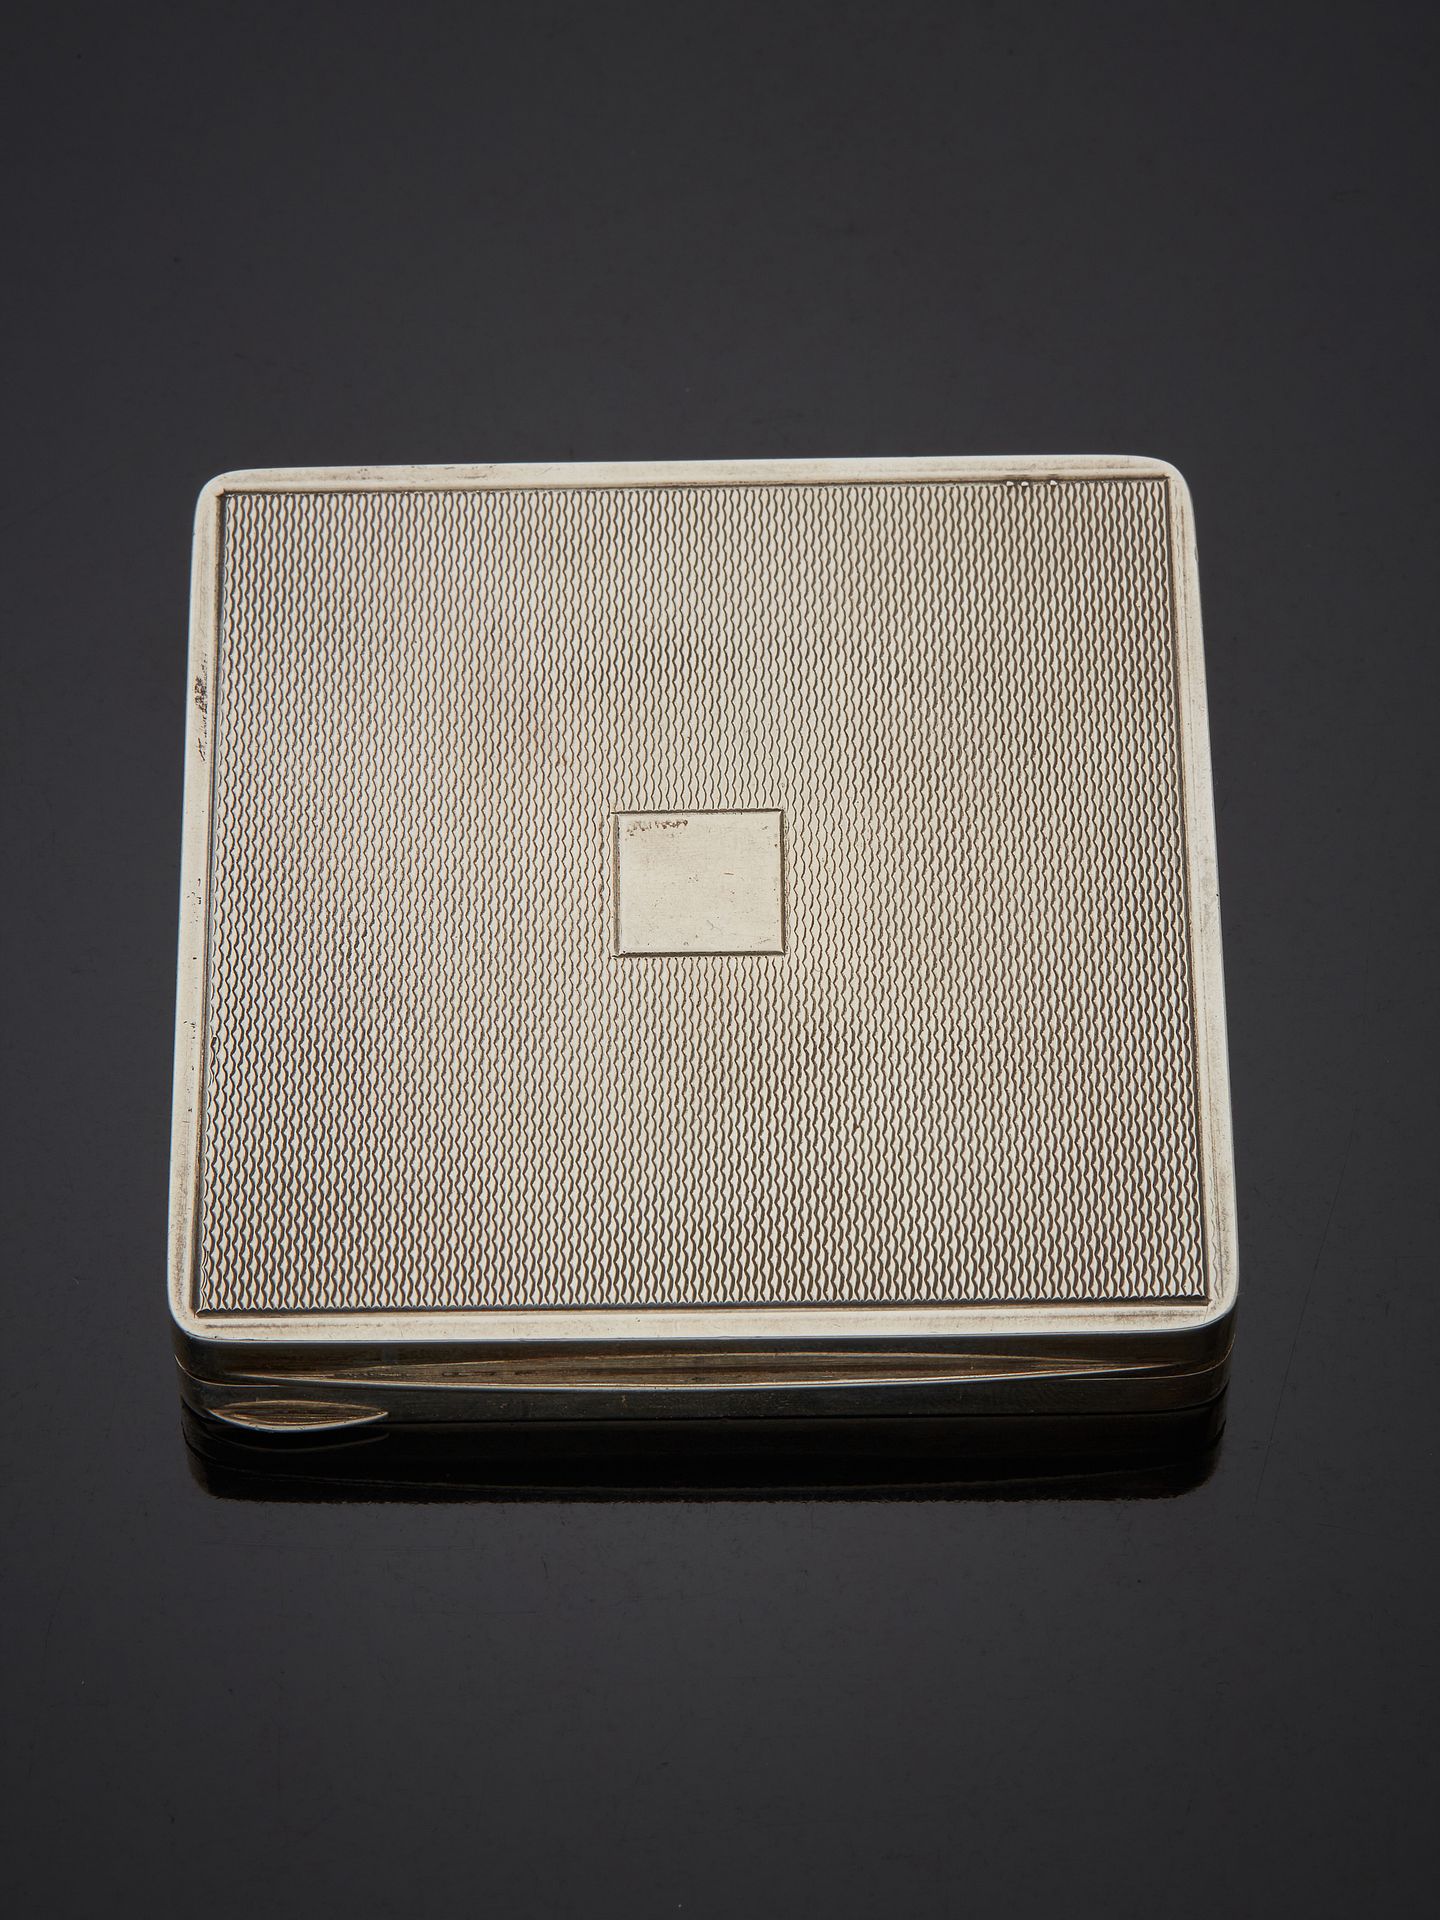 Null Henin Cie
Poudrier in silver 1er titre 950‰, square form, the lid and botto&hellip;